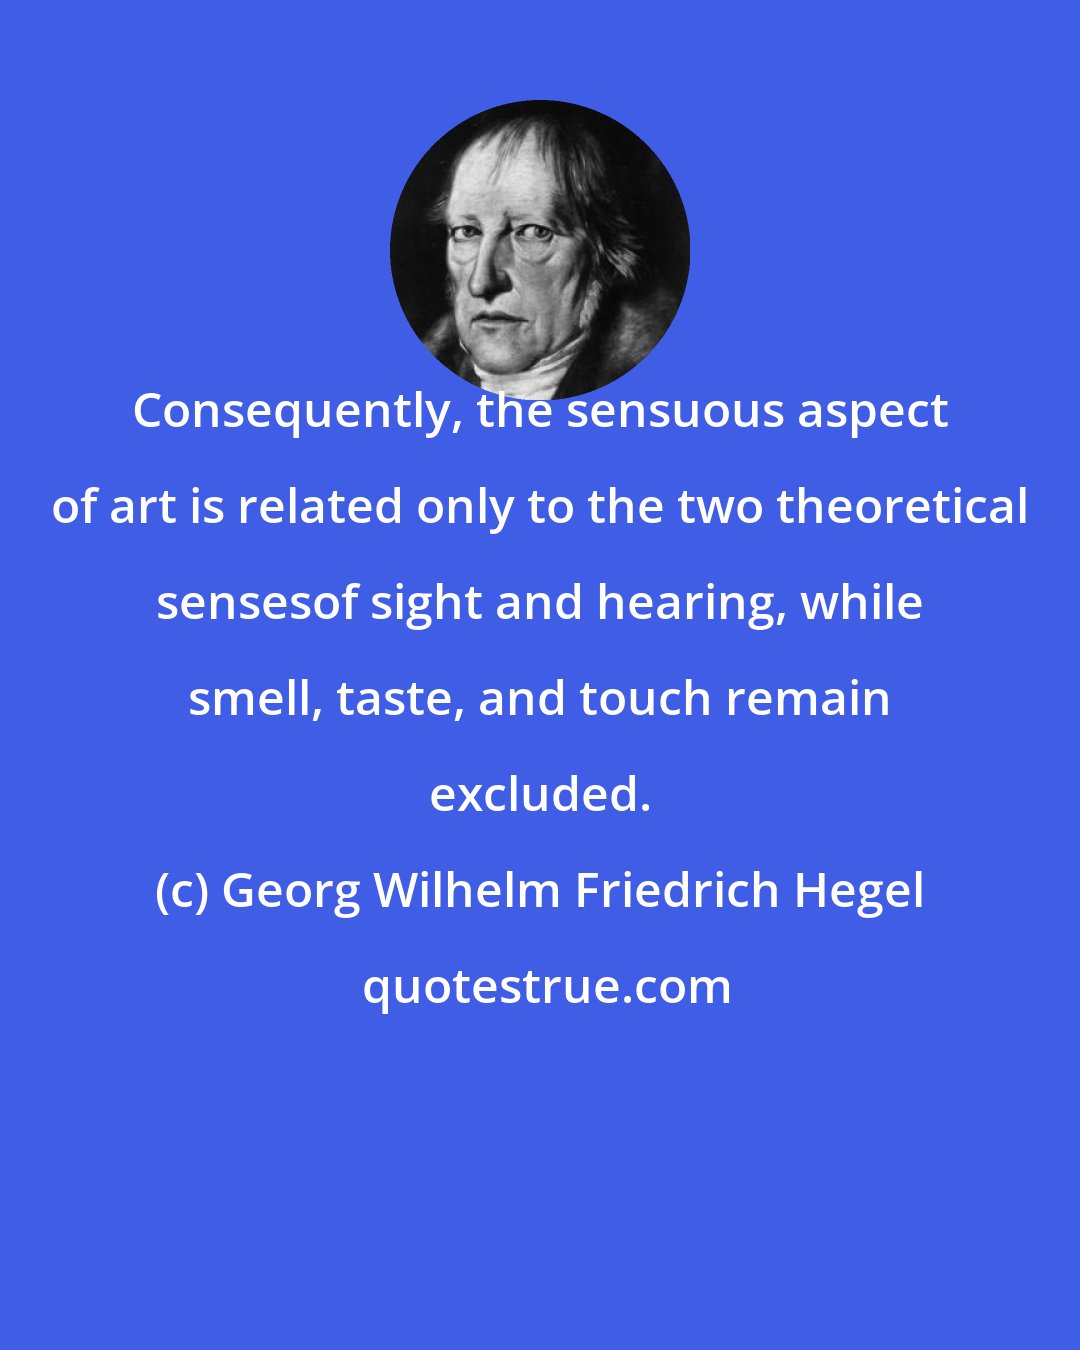 Georg Wilhelm Friedrich Hegel: Consequently, the sensuous aspect of art is related only to the two theoretical sensesof sight and hearing, while smell, taste, and touch remain excluded.